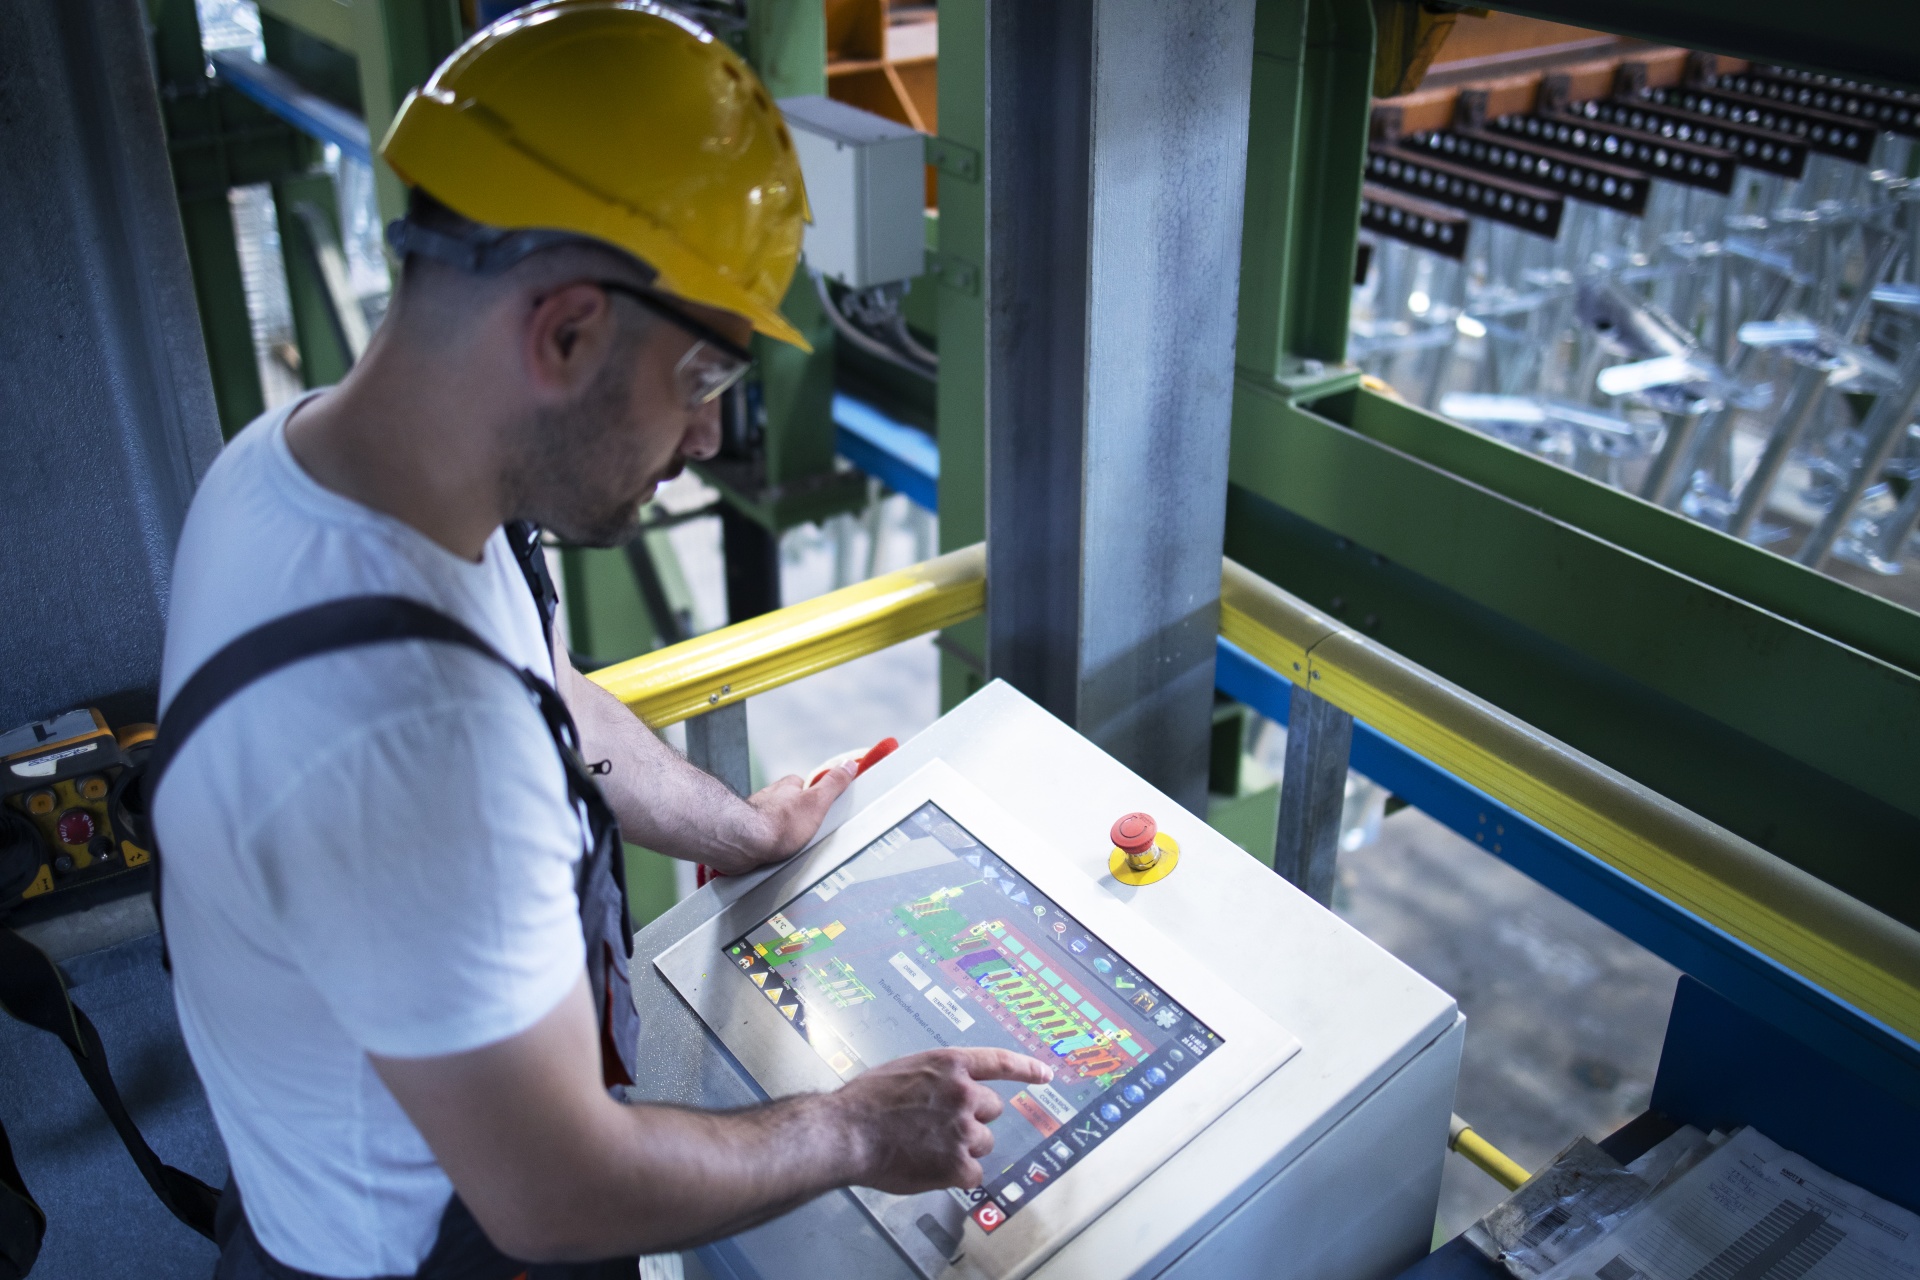 factory-worker-monitoring-industrial-machines-and-production-remotely-in-control-room.jpg